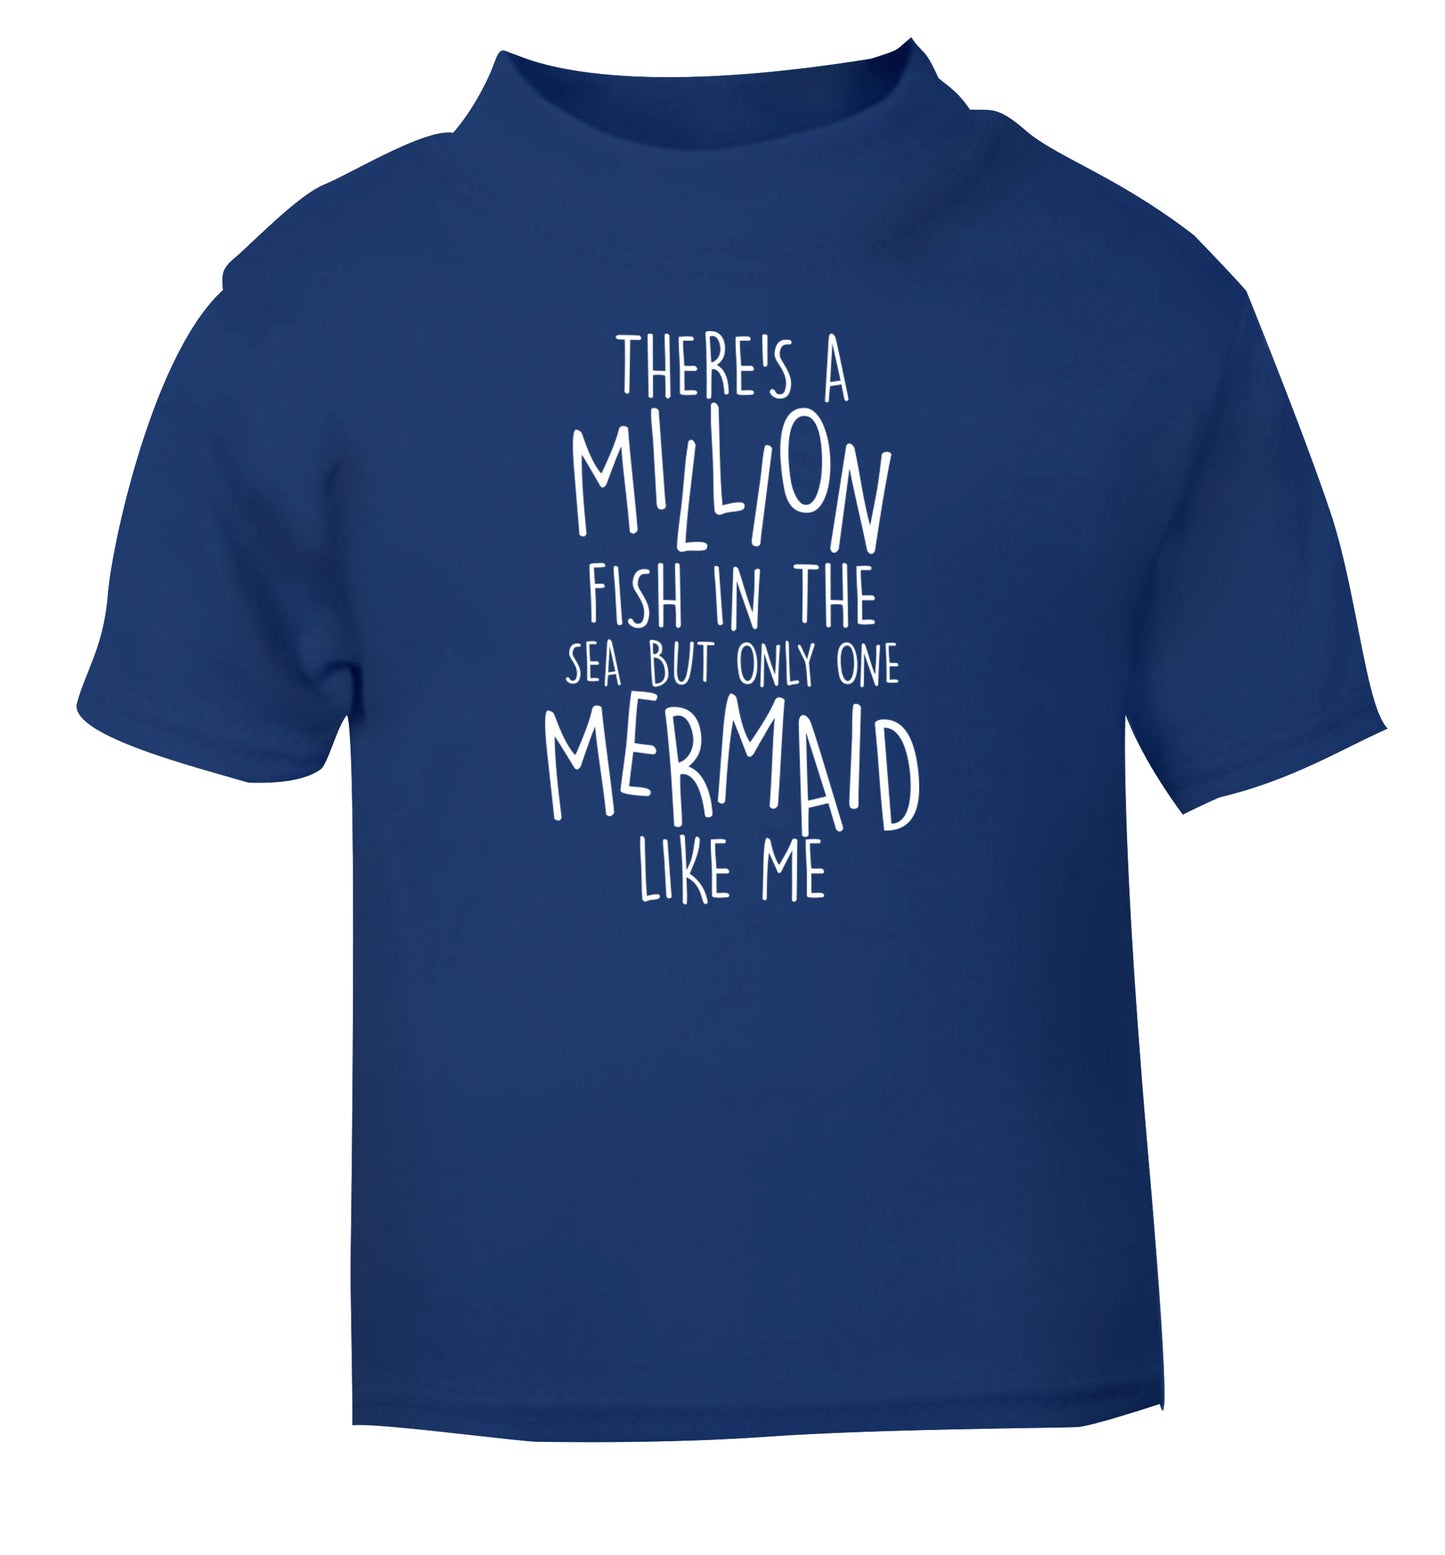 There's a million fish in the sea but only one mermaid like me blue Baby Toddler Tshirt 2 Years